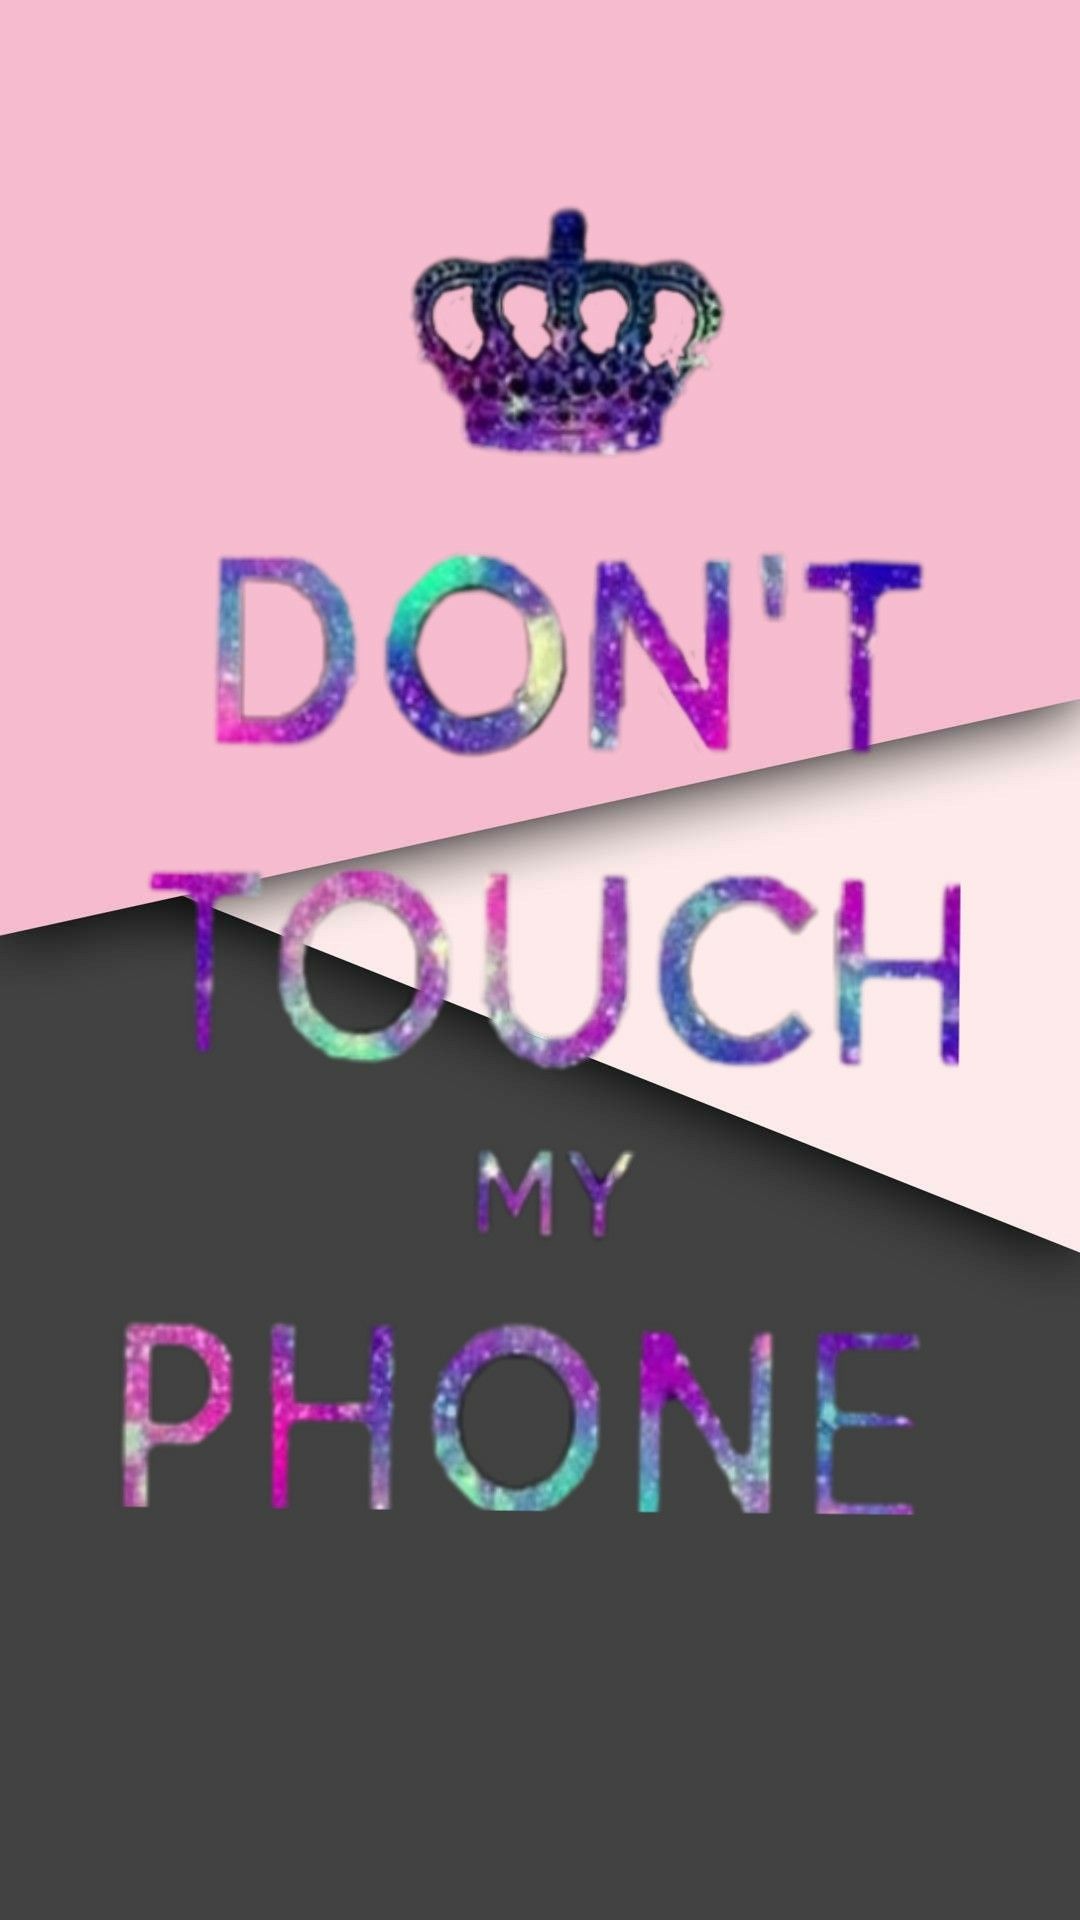 Don't touch my phone. Dont touch my phone wallpaper, Funny phone wallpaper, iPhone wallpaper girly